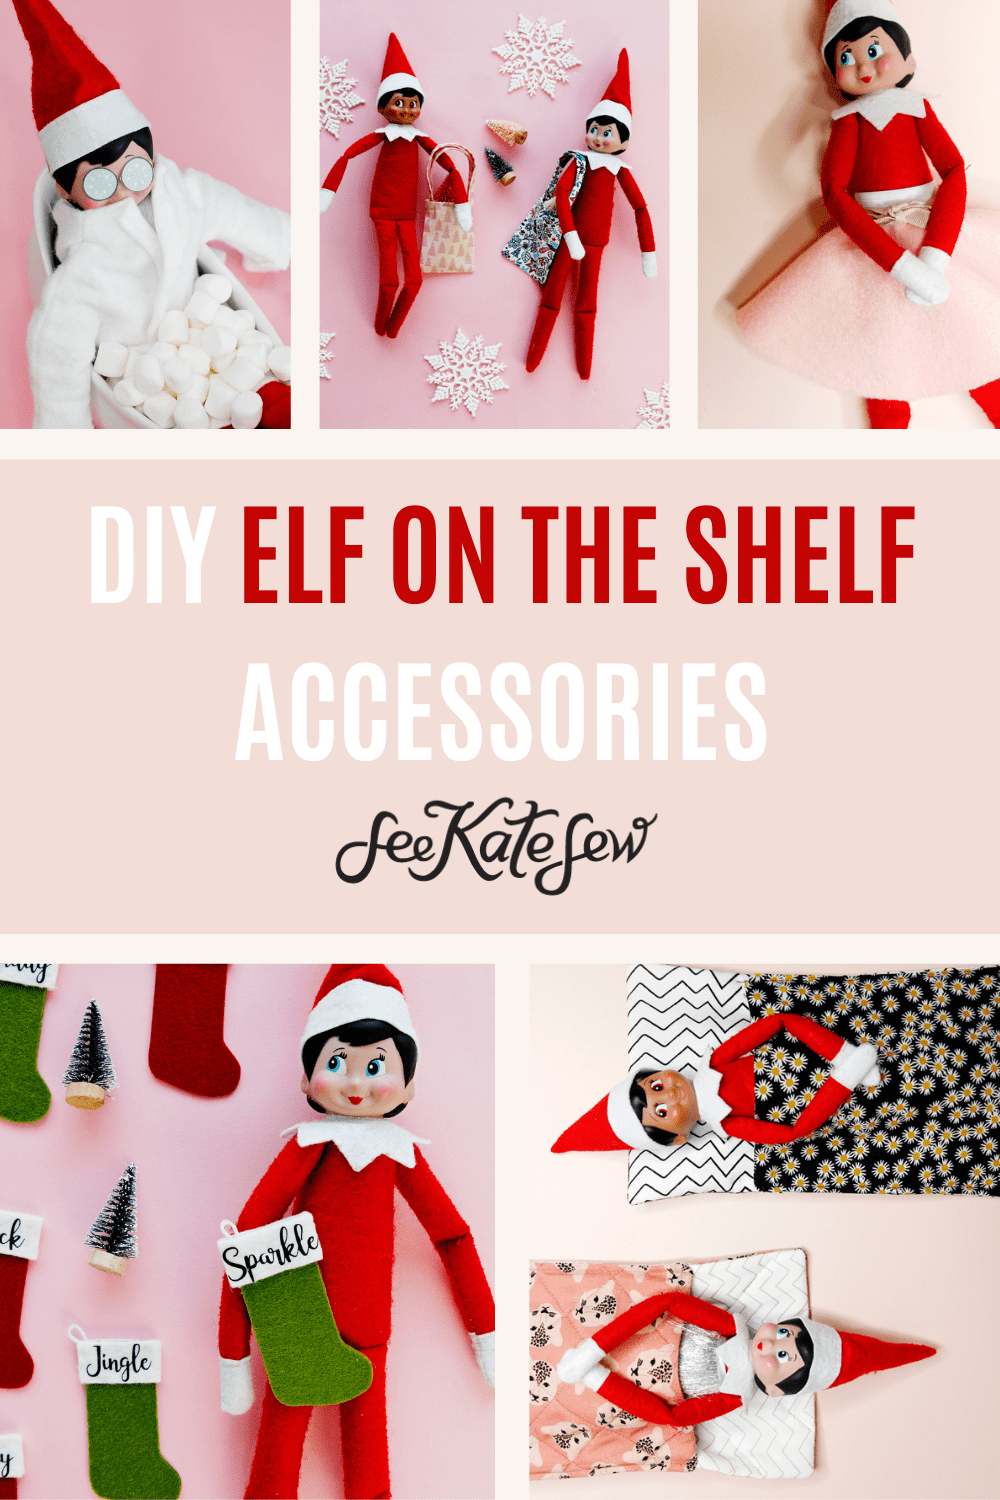 diy elf on the shelf accessories - see kate sew